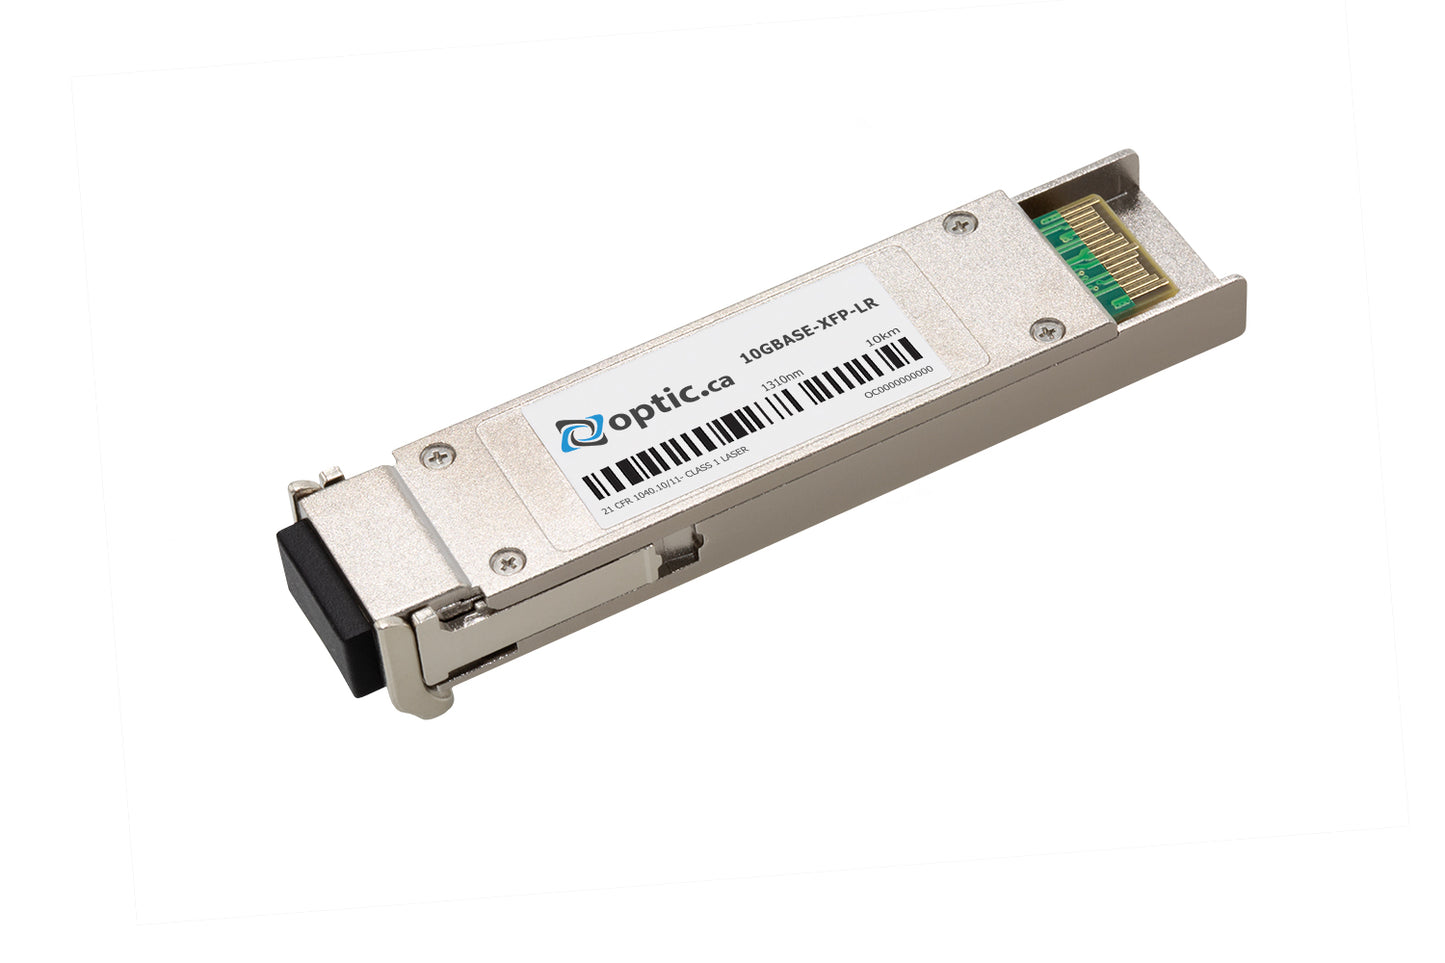 OPTIC.CA - 10GBASE-LR XFP - JD108A-OC - HPE COMPATIBLE